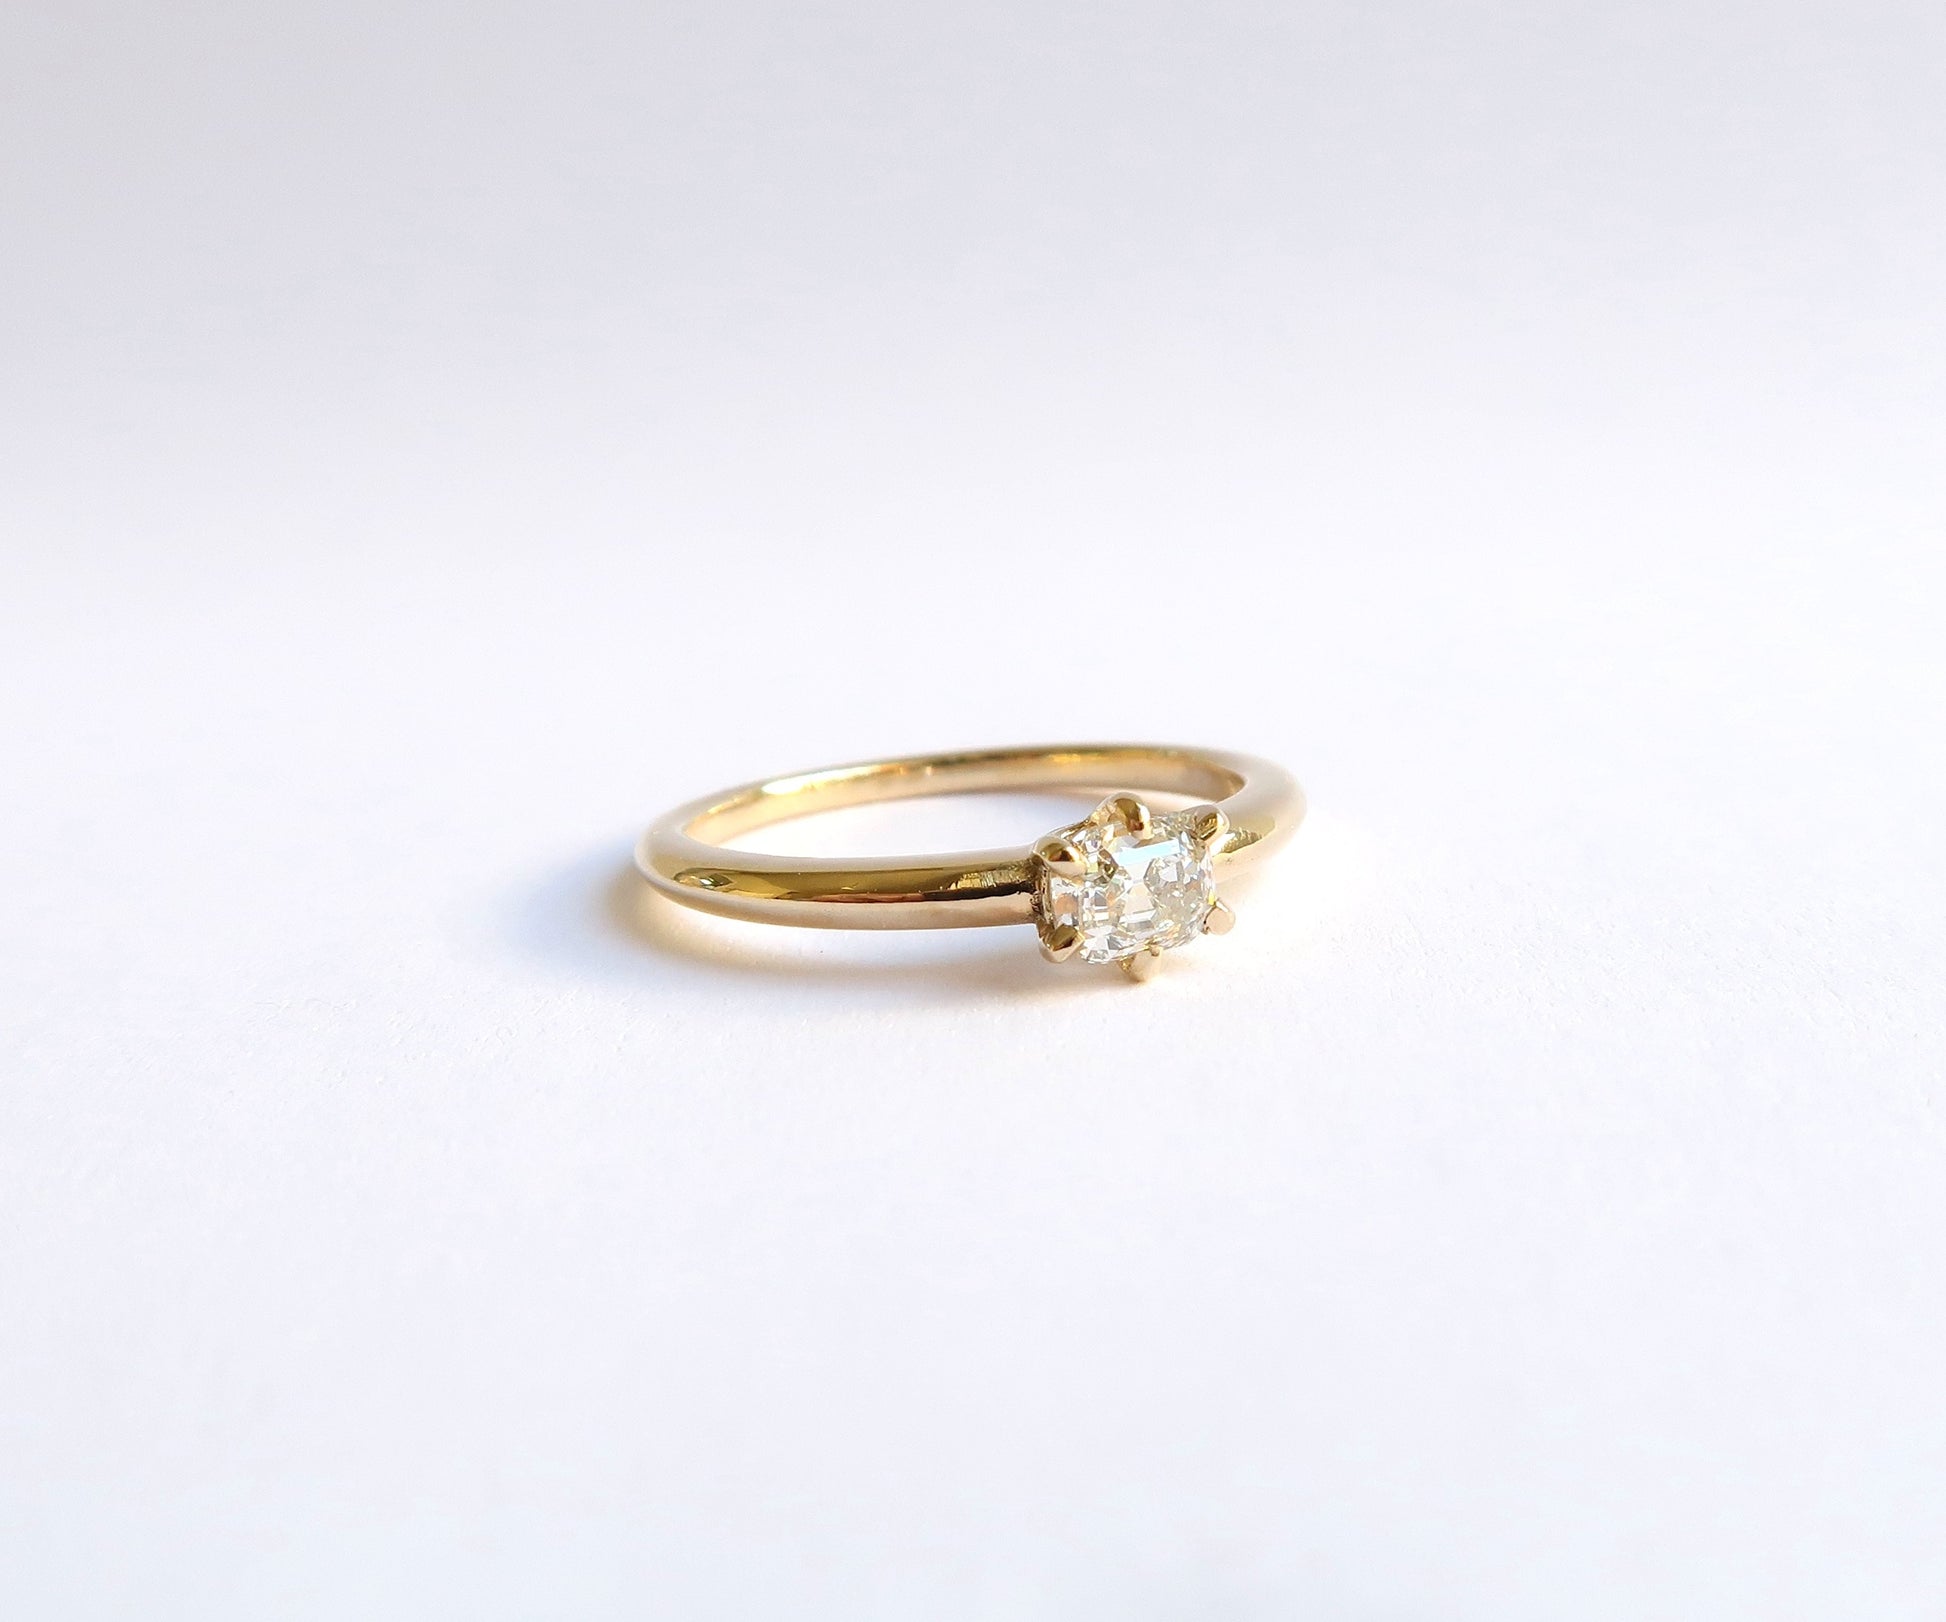 Solitaire Diamond Ring in yellow gold